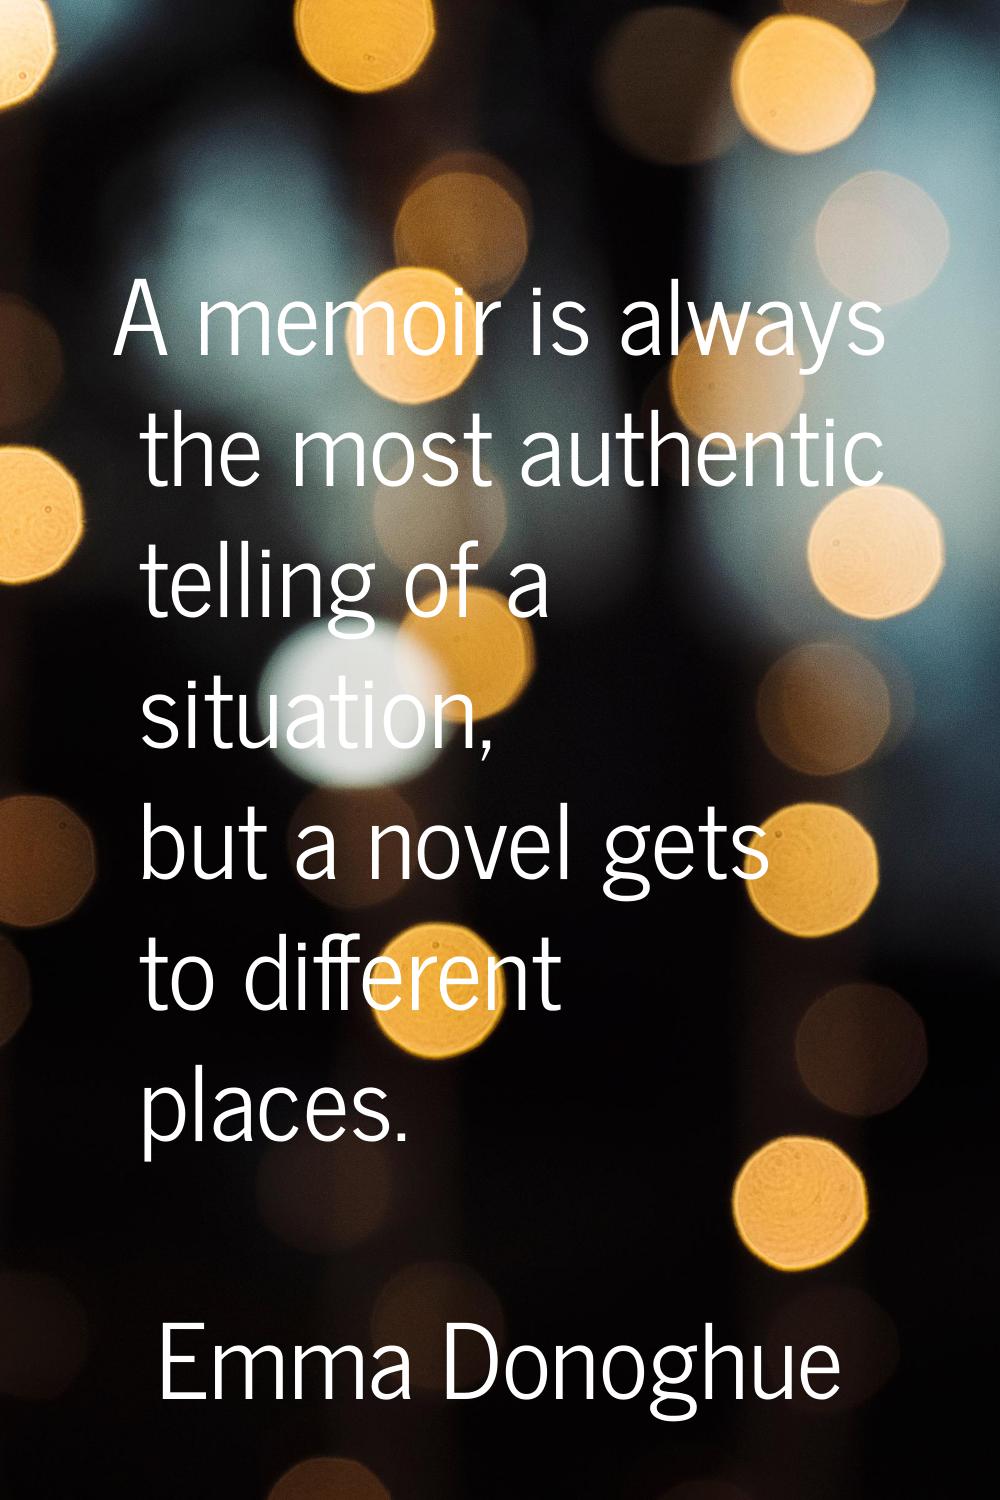 A memoir is always the most authentic telling of a situation, but a novel gets to different places.